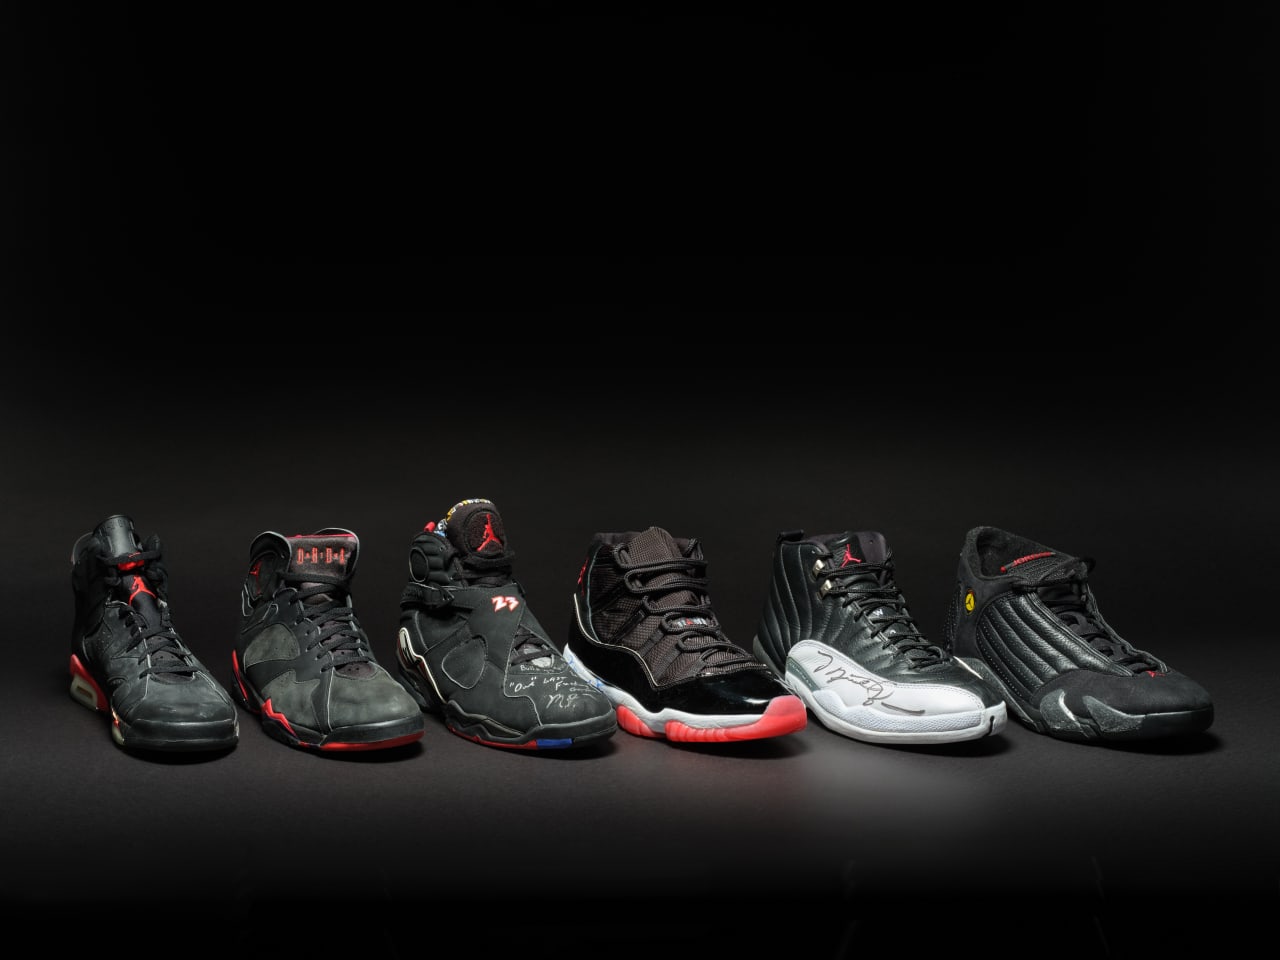 The “Dynasty Collection” of six individual Air Jordan sneakers won by basketball great Michael Jordan during six NBA Finals championships from 1991 through his final season with Chicago Bulls in 1998. The group was bought for $8 million at Sotheby’s on Friday.
Courtesy of Sotheby’s